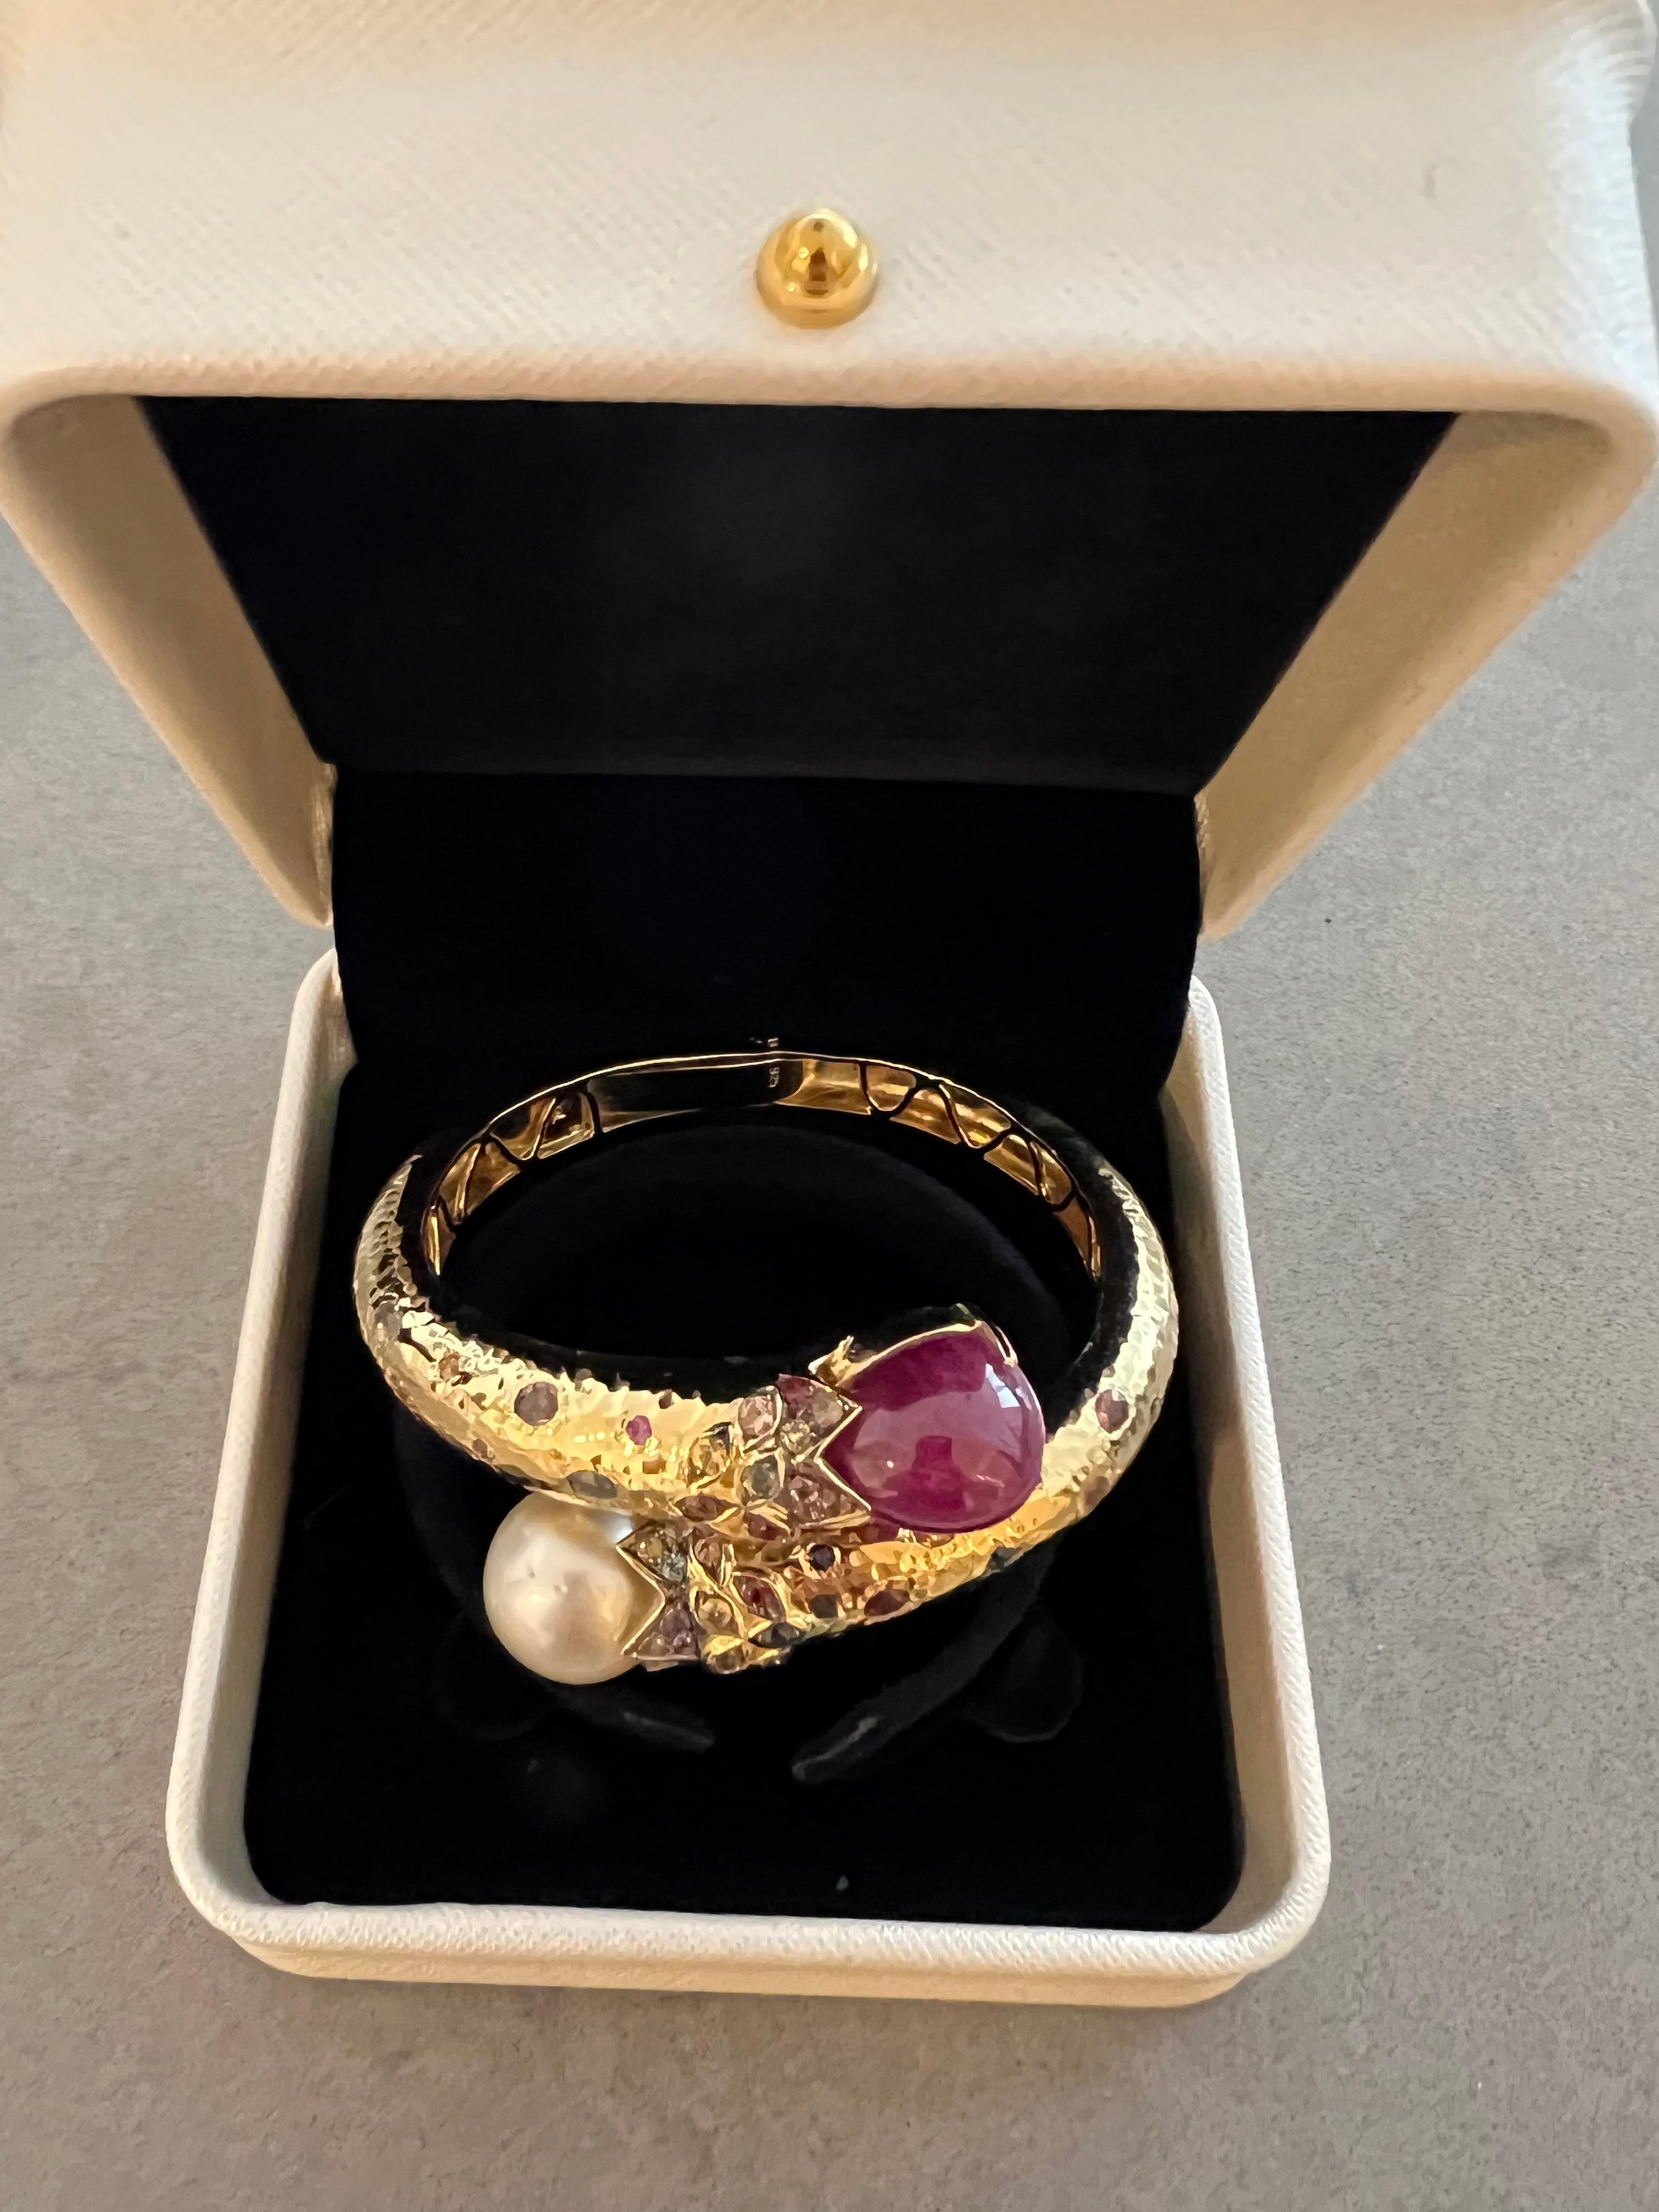 Women's BOCHIC “Orient” Bangle Set 22k Gold & Silver with Pearls & Fancy Color Sapphires